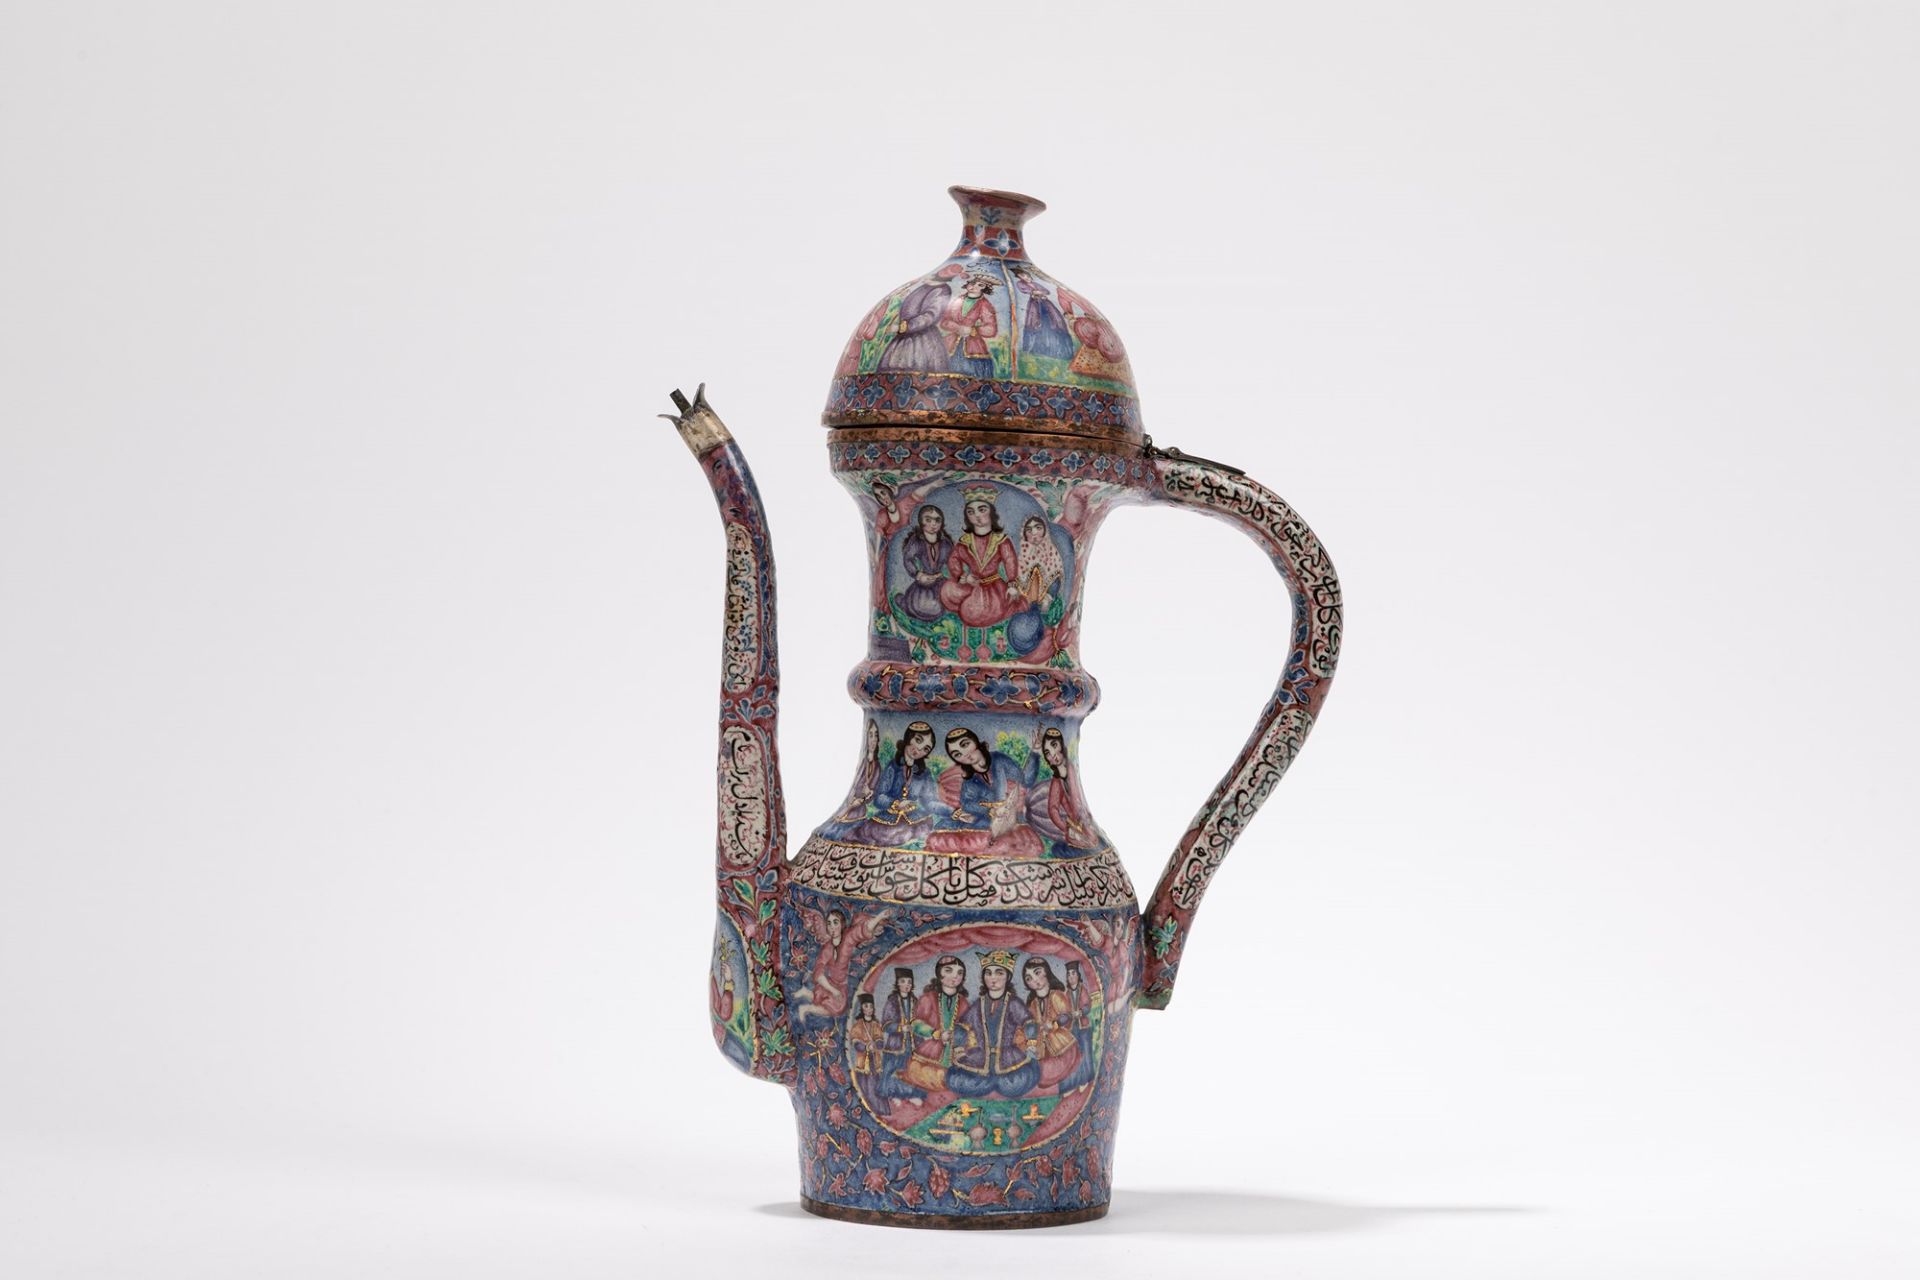 A QAJAR ENAMELLED LIDDED COPPER COFFEE POT, Iran, second half of 19th century - Image 2 of 2